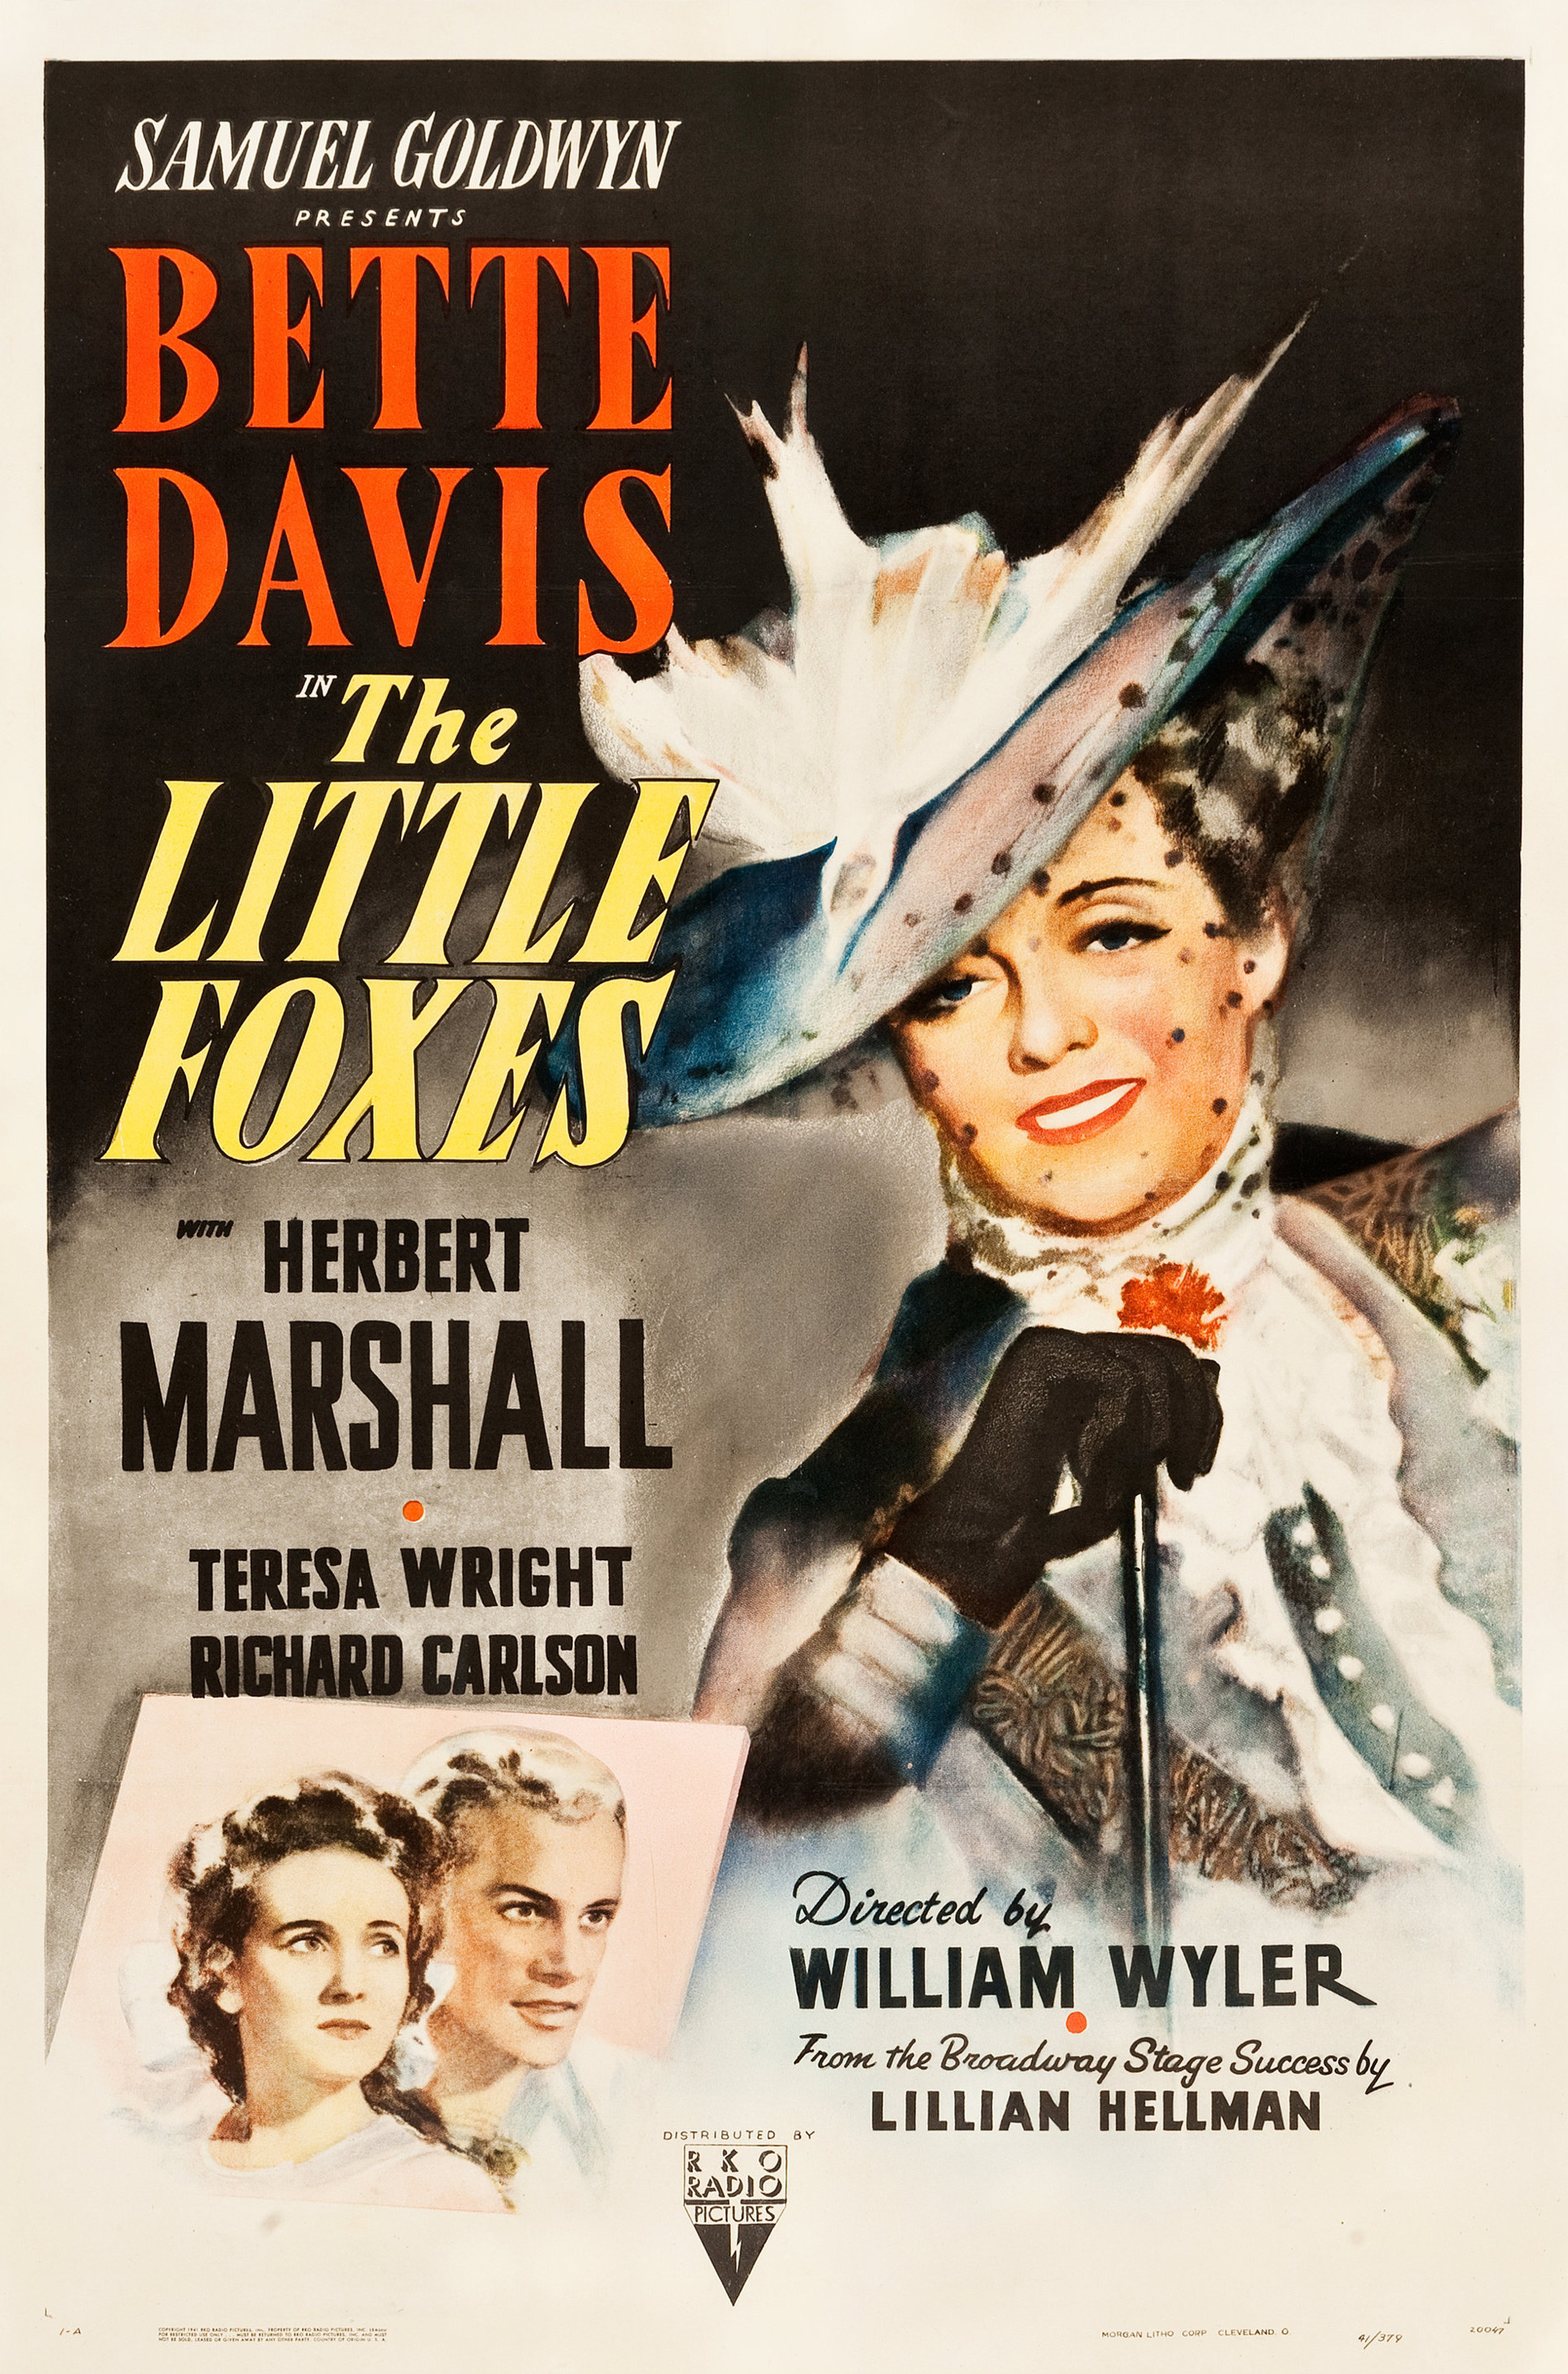 The Little Foxes (film) - Wikipedia